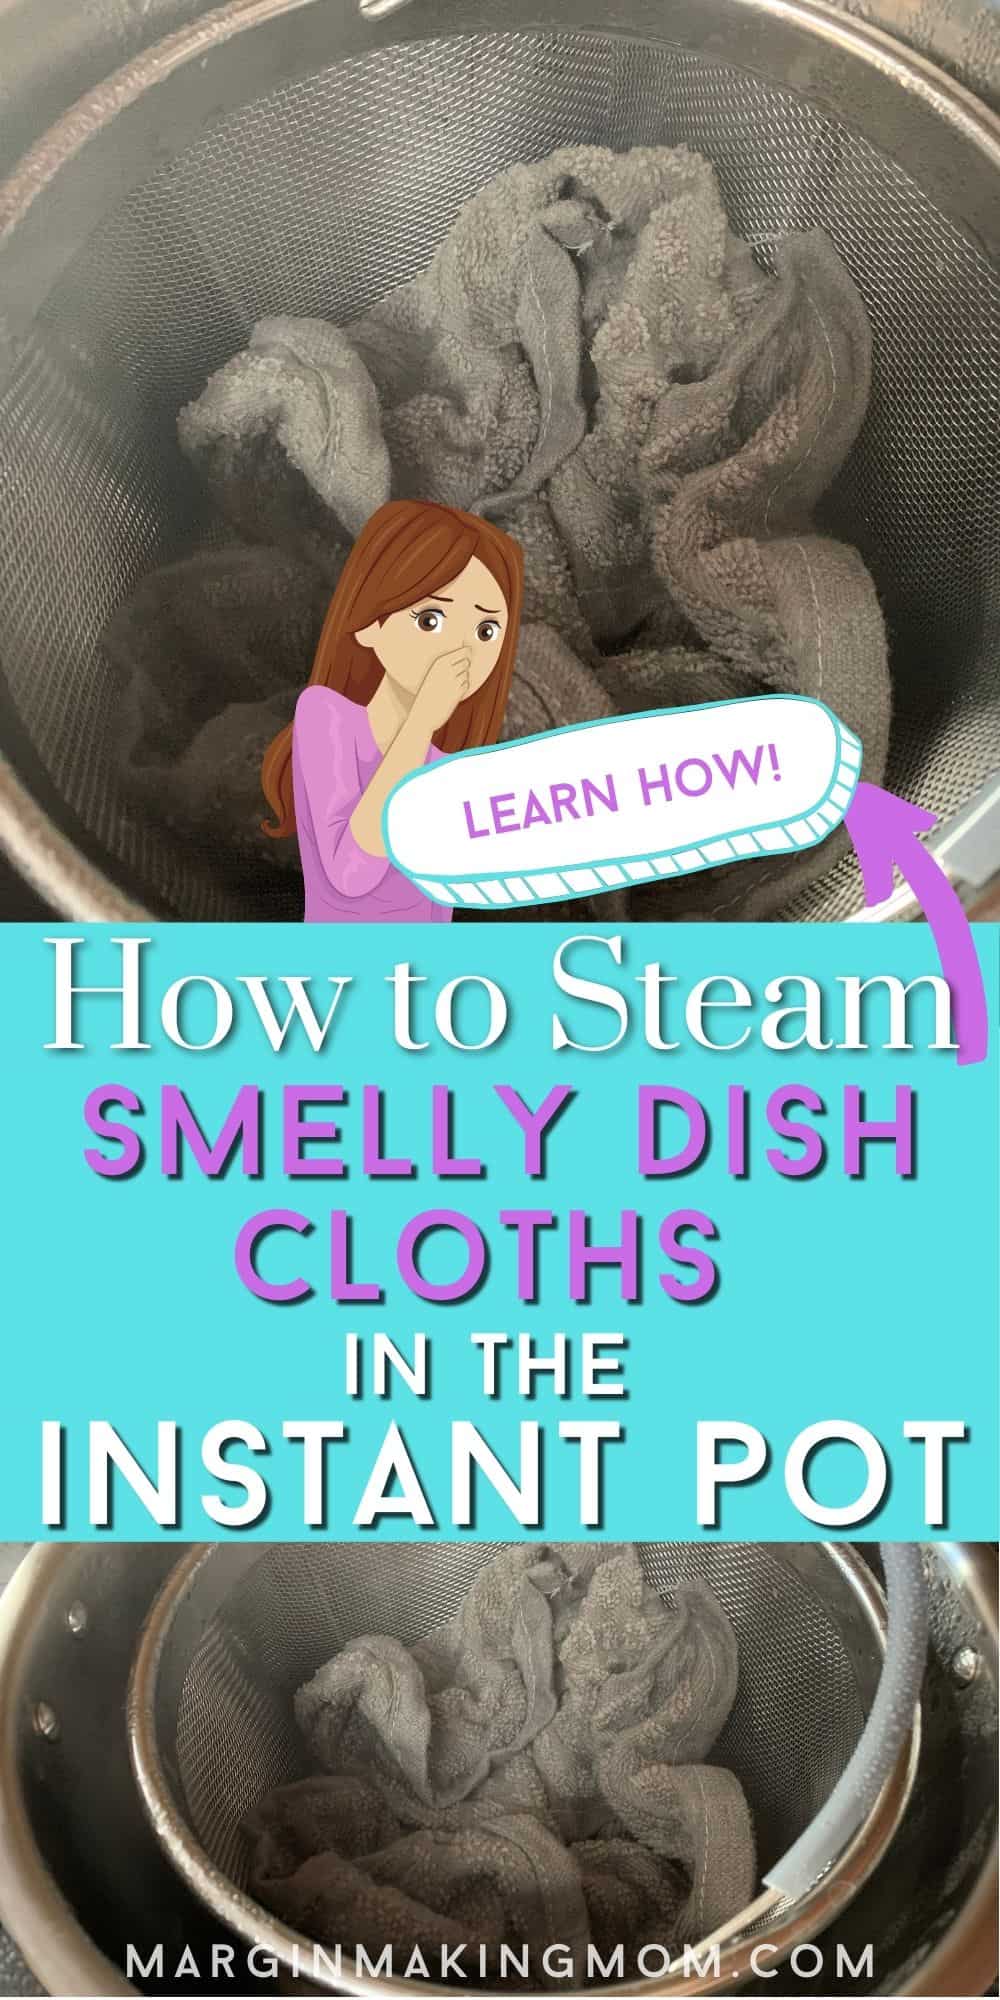 a collage with two images showing gray wash cloths in a steamer basket in the Instant Pot, with an overlay that reads, "How to Steam Smelly Dish Cloths in the Instant Pot" and a graphic of a woman in a purple shirt pinching her nose